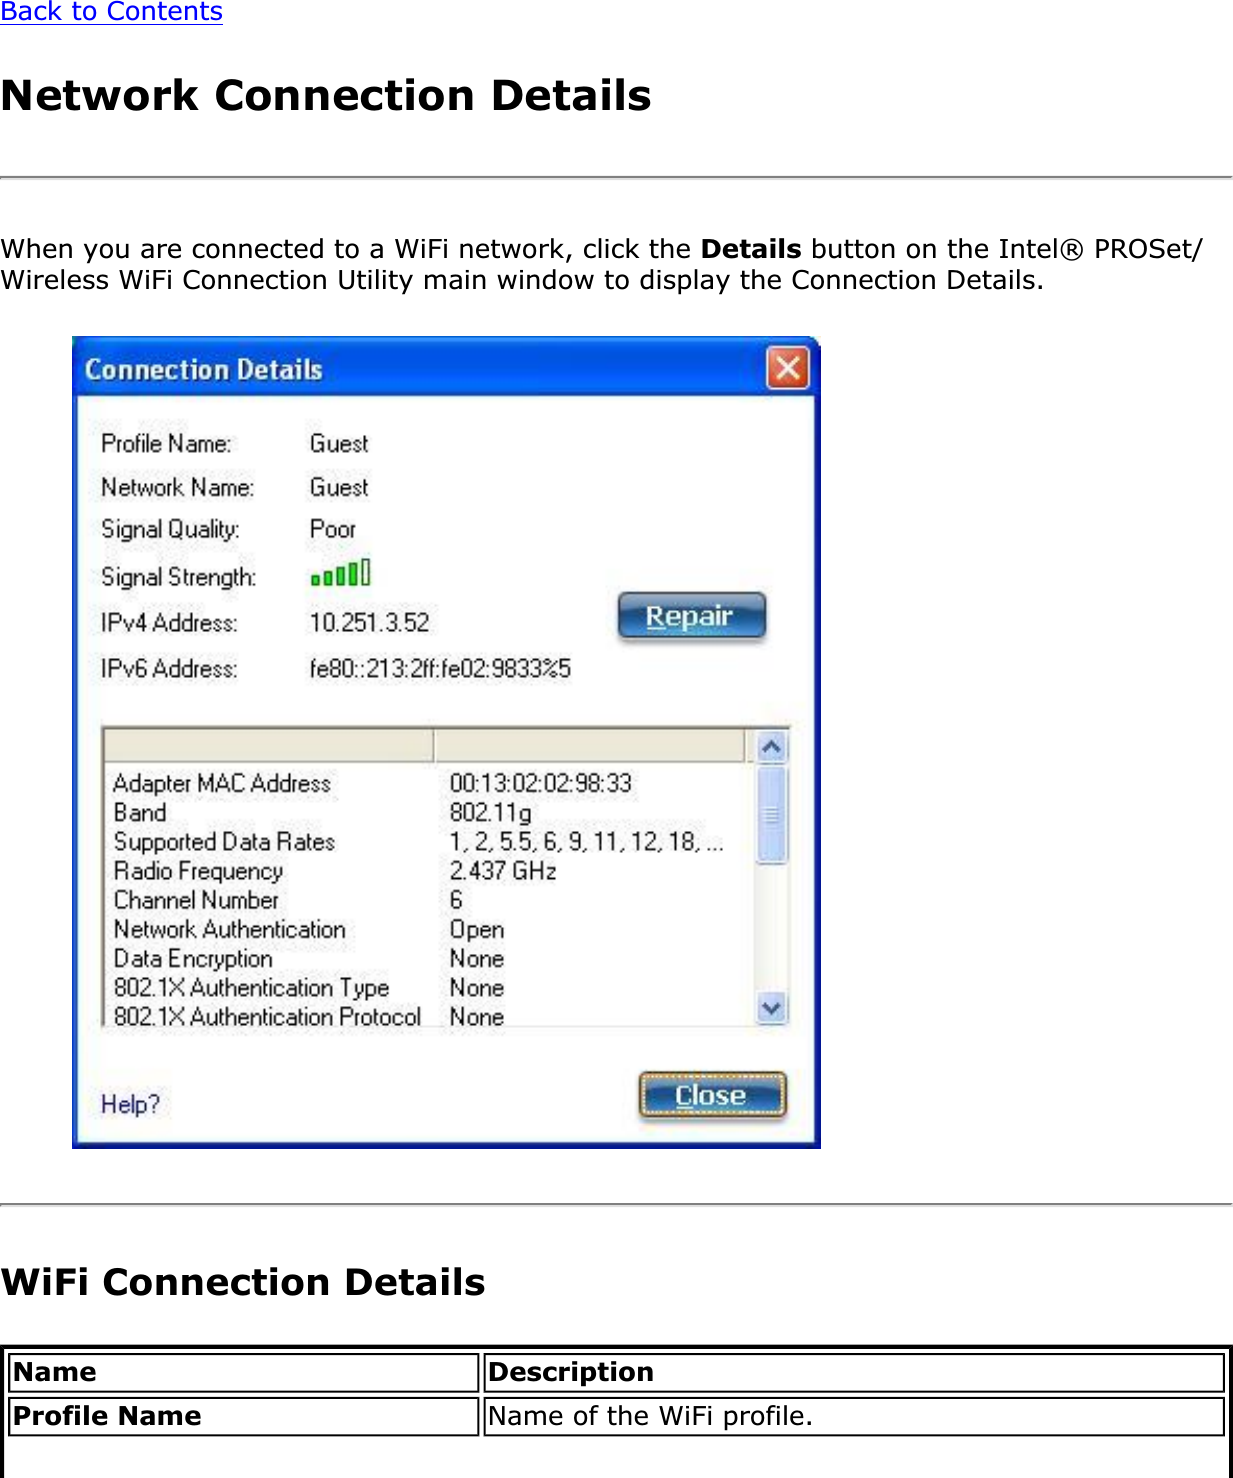 Back to ContentsNetwork Connection DetailsWhen you are connected to a WiFi network, click the Details button on the Intel® PROSet/Wireless WiFi Connection Utility main window to display the Connection Details. WiFi Connection DetailsName DescriptionProfile Name Name of the WiFi profile. 